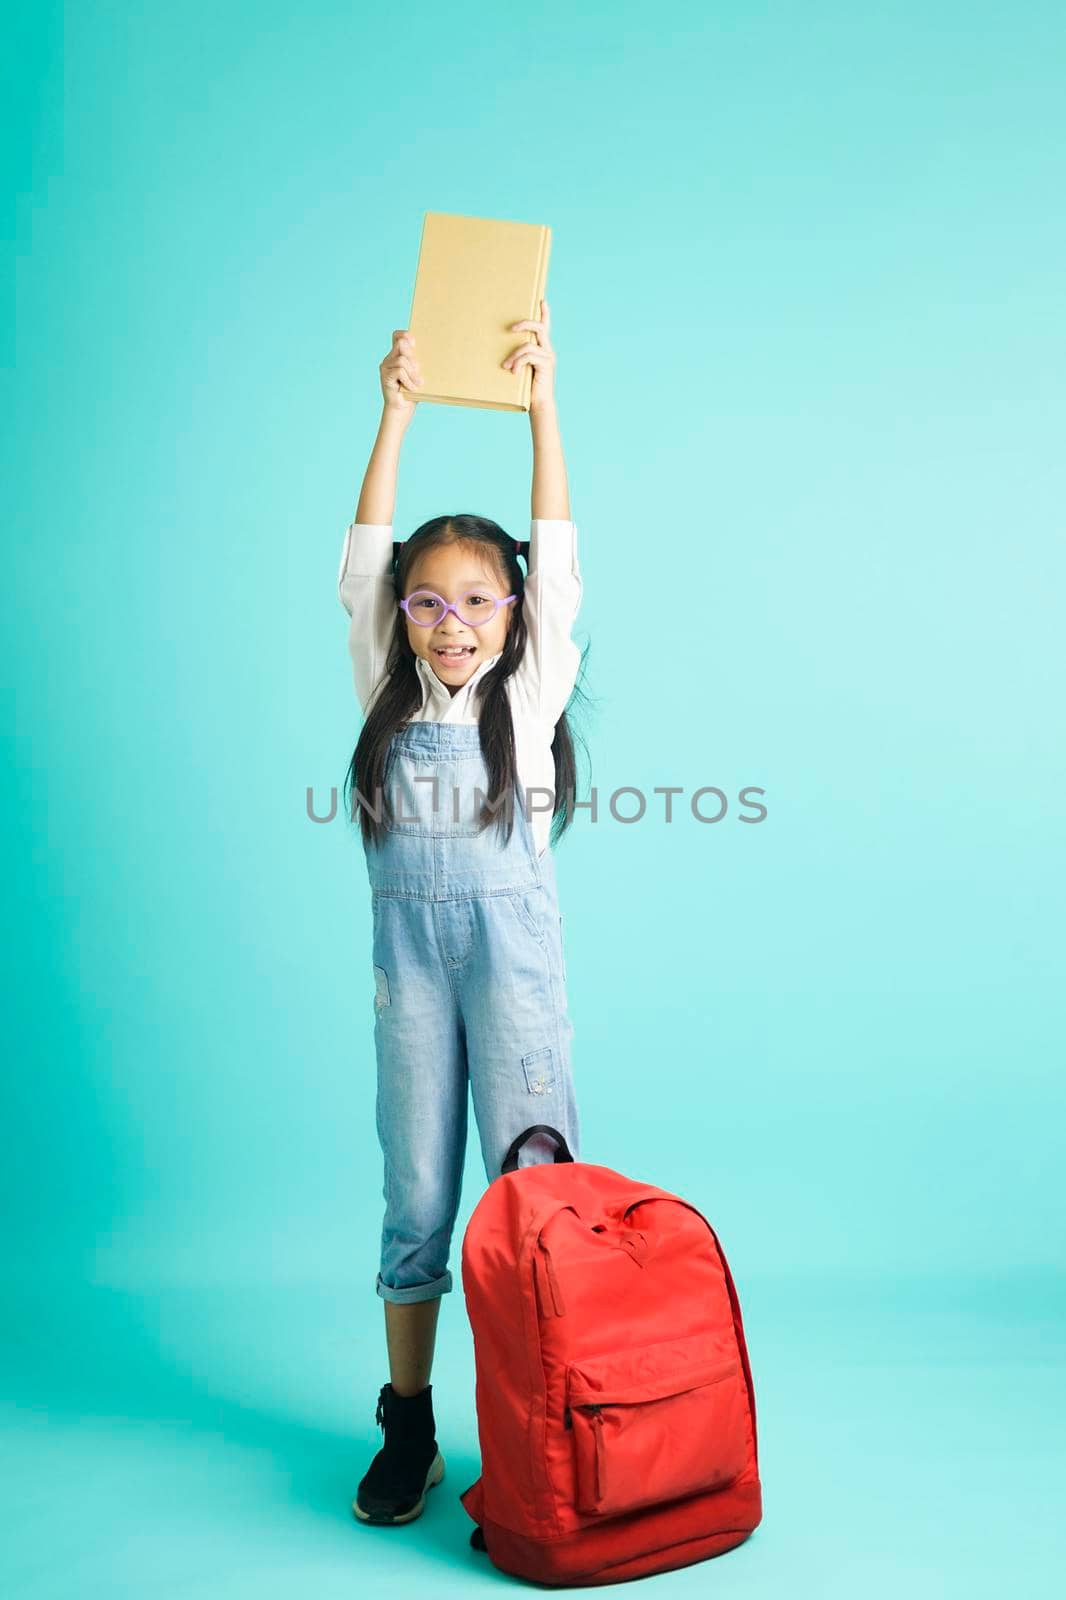 kid students girl smiling holding book, going to school. school concept.